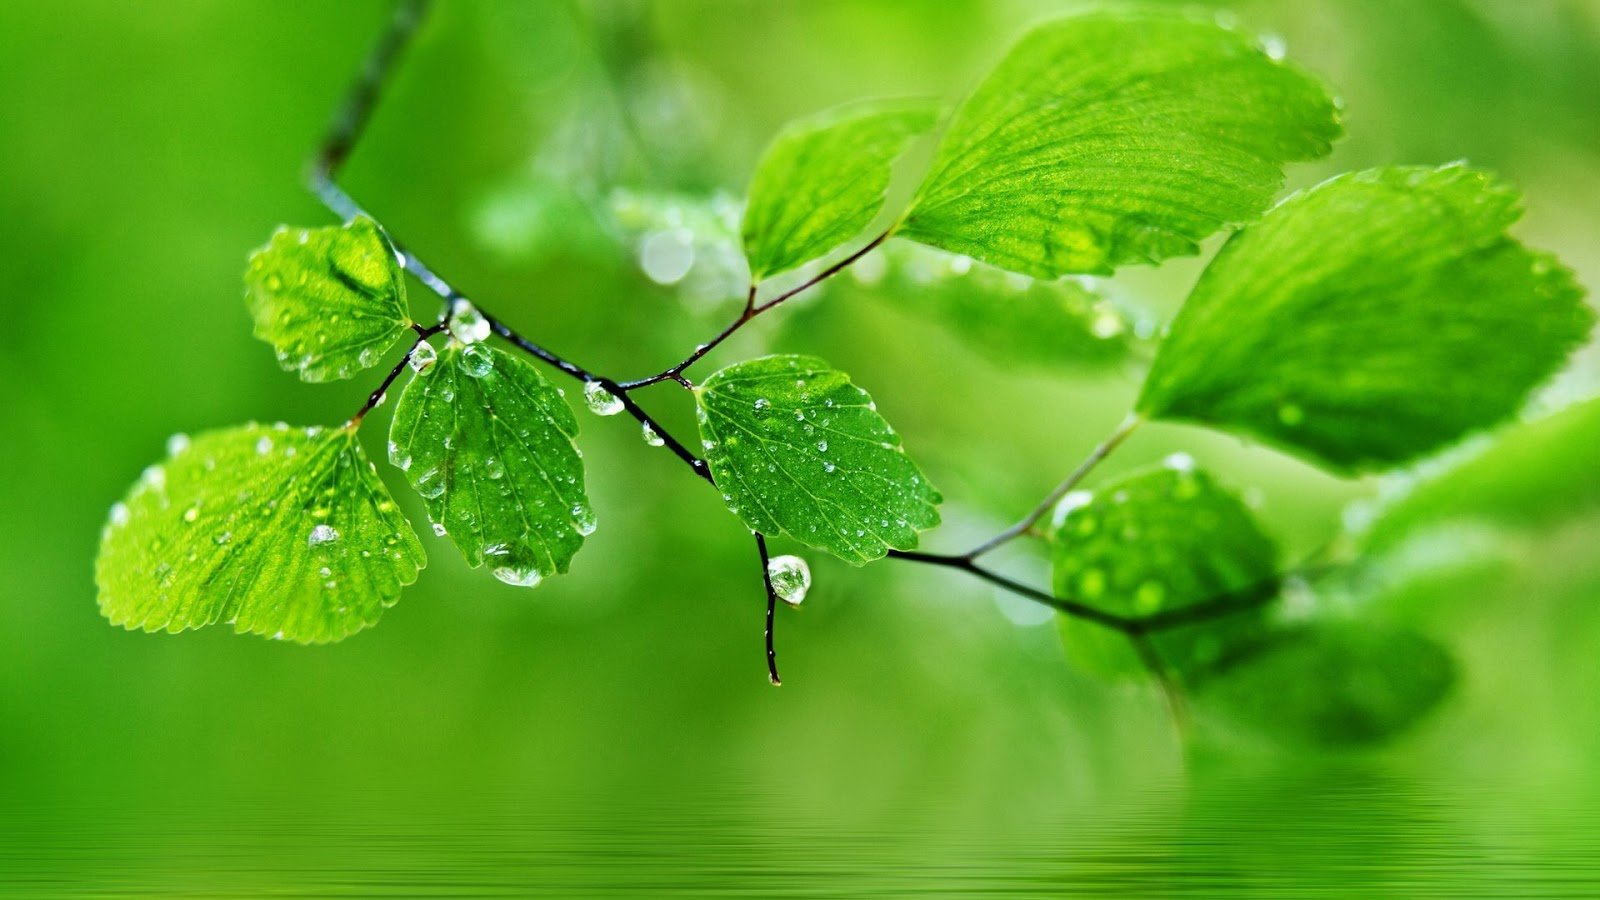 wallpapers hd green leaves water droplets ripple hd picture water drop